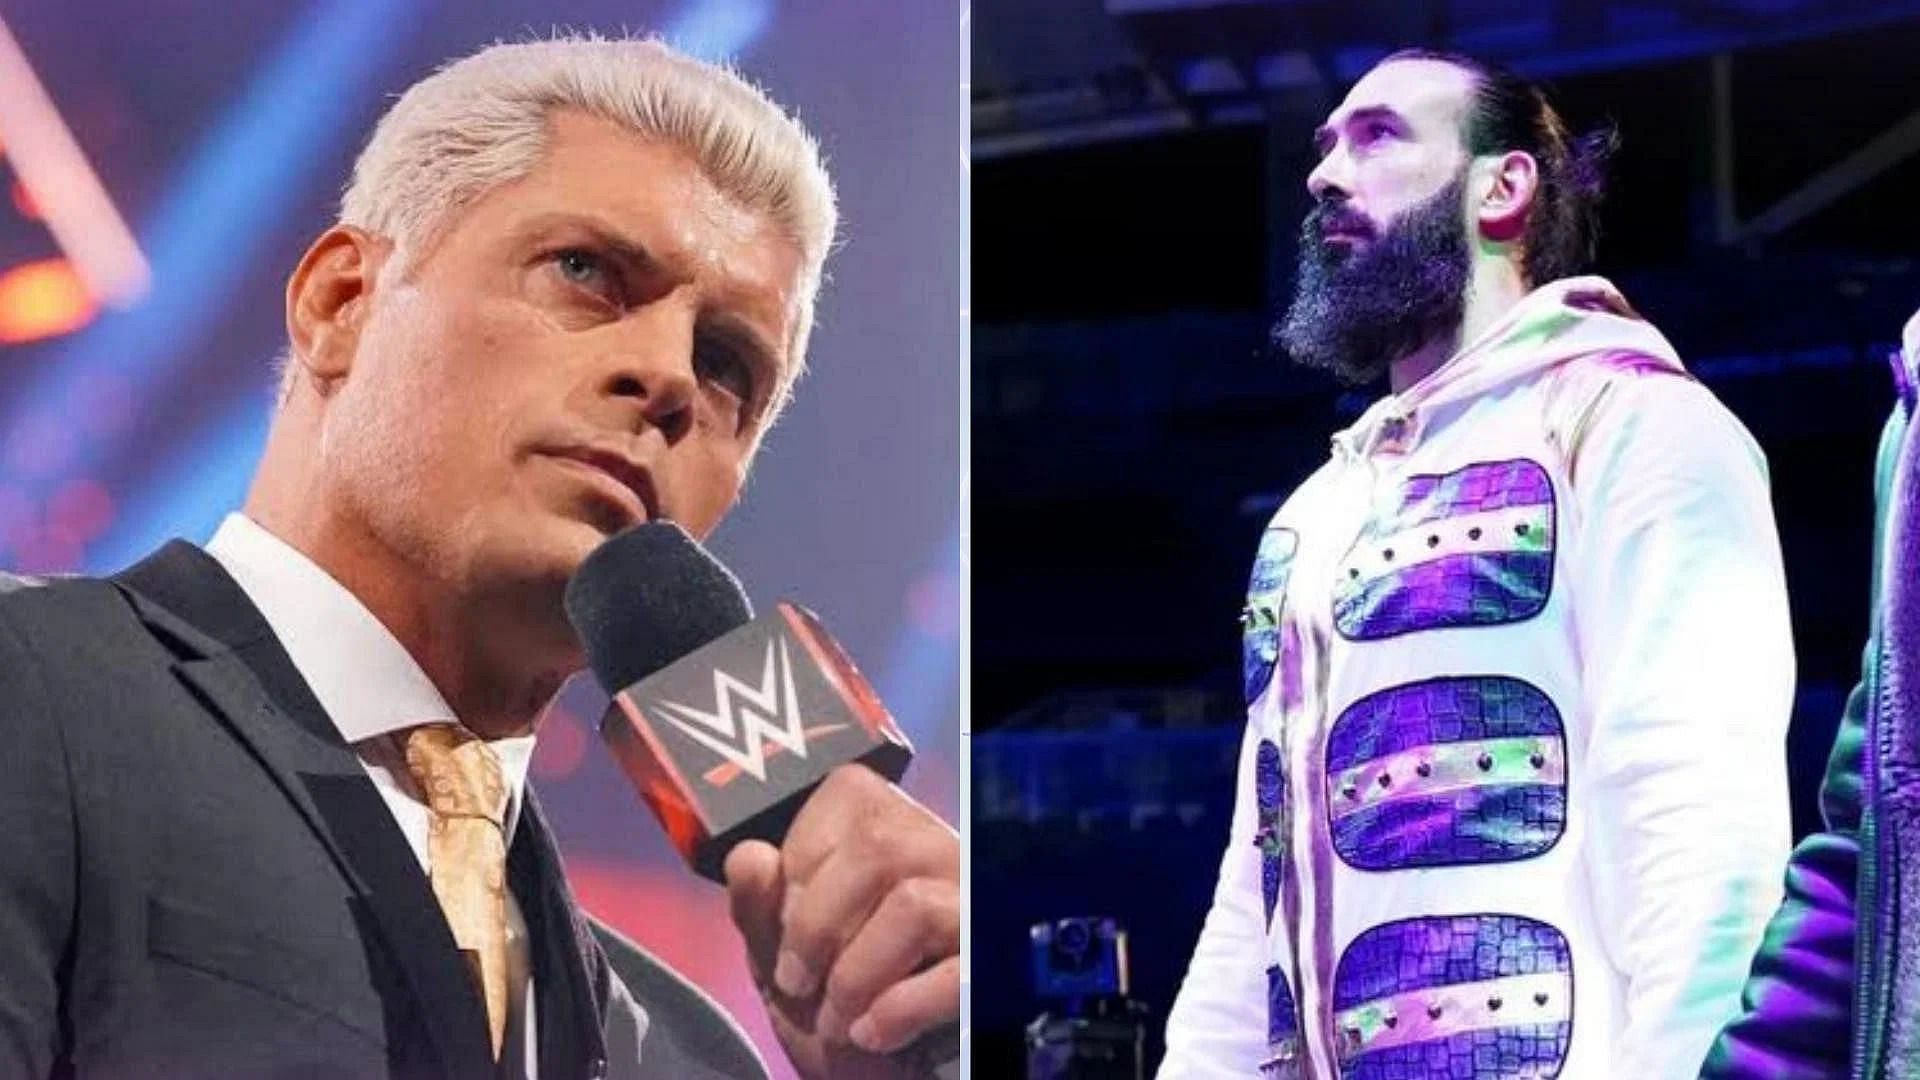 The stars worked closely together in AEW. [Images via WWE and AEW